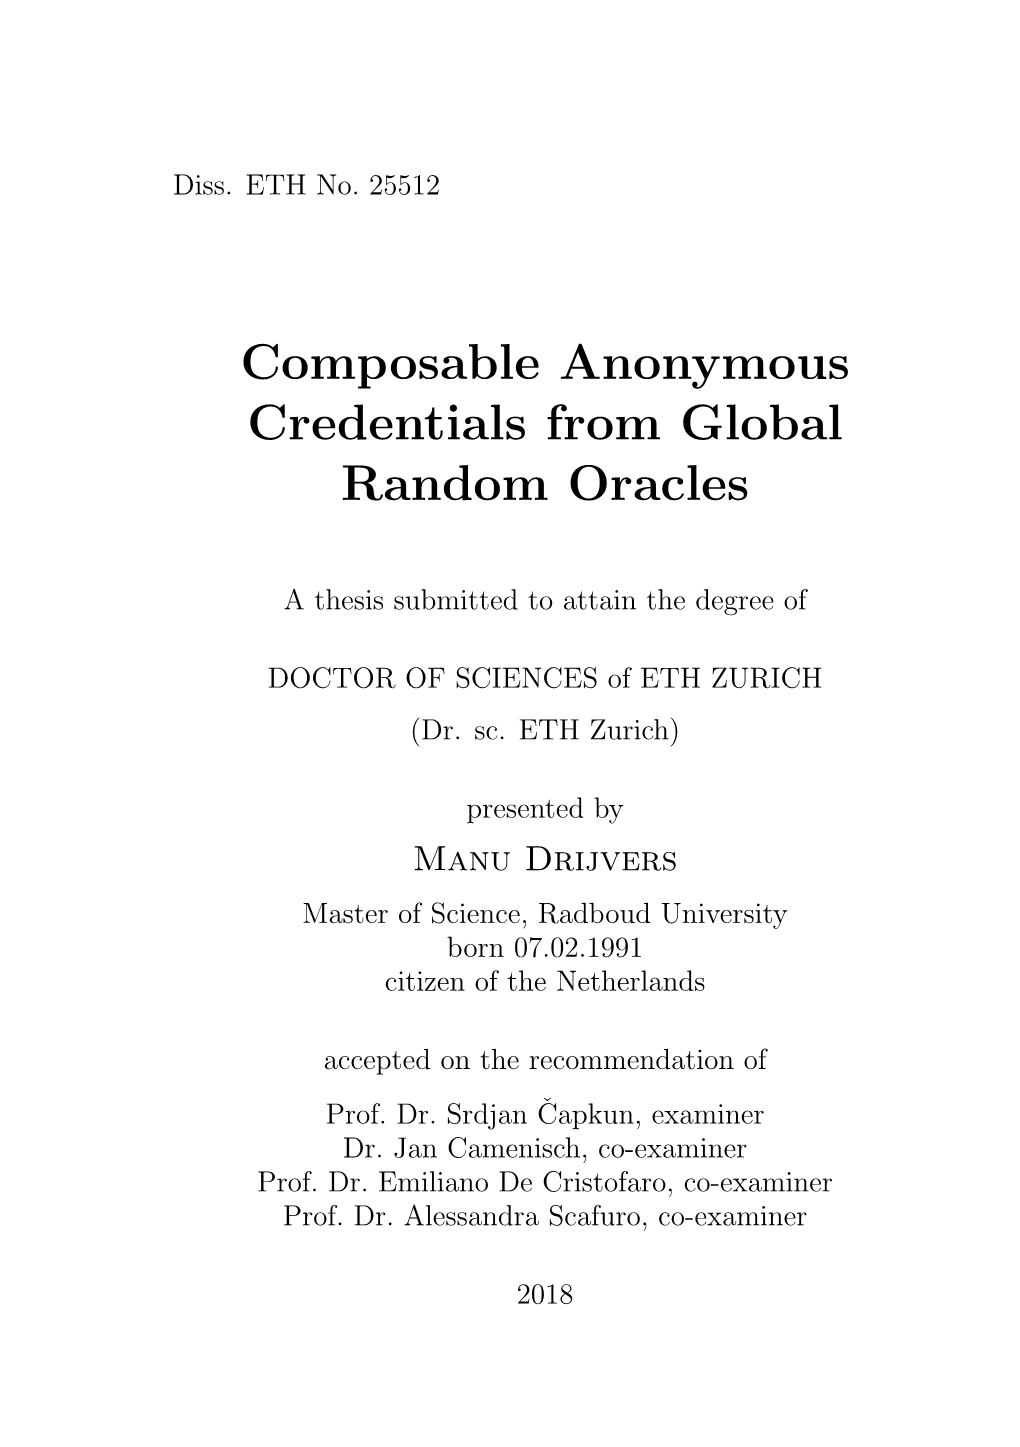 Composable Anonymous Credentials from Global Random Oracles